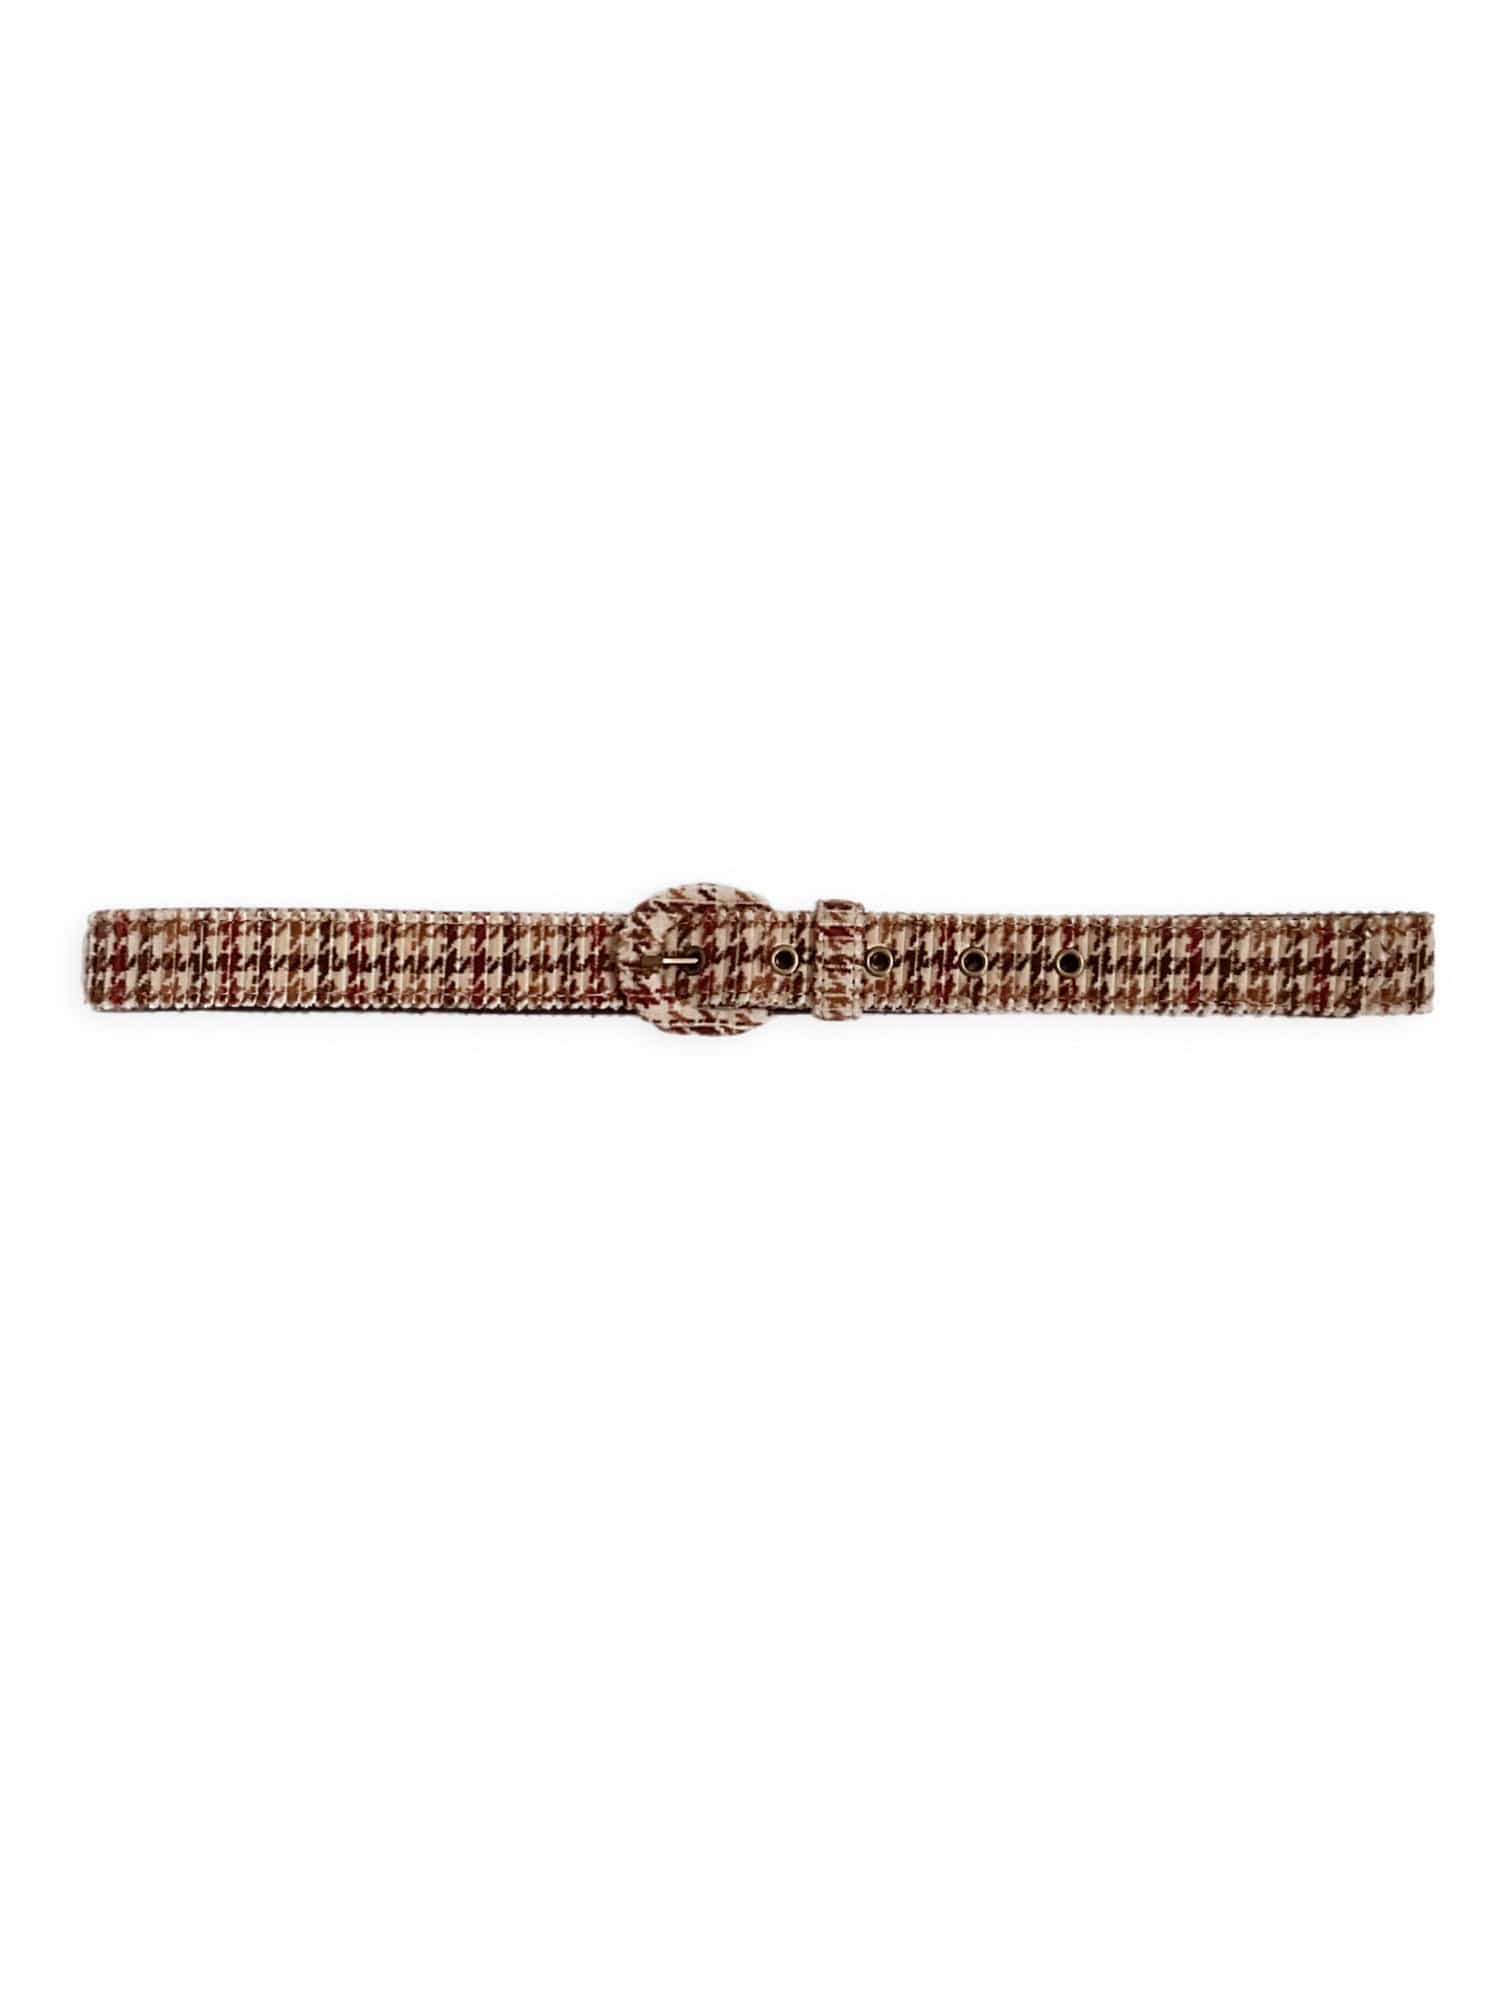 Narrow Belt for Nature vs Nurture Collection Belts CHRISTINE ALCALAY Houndstooth Corduroy (Italian Cotton) Extra Small 